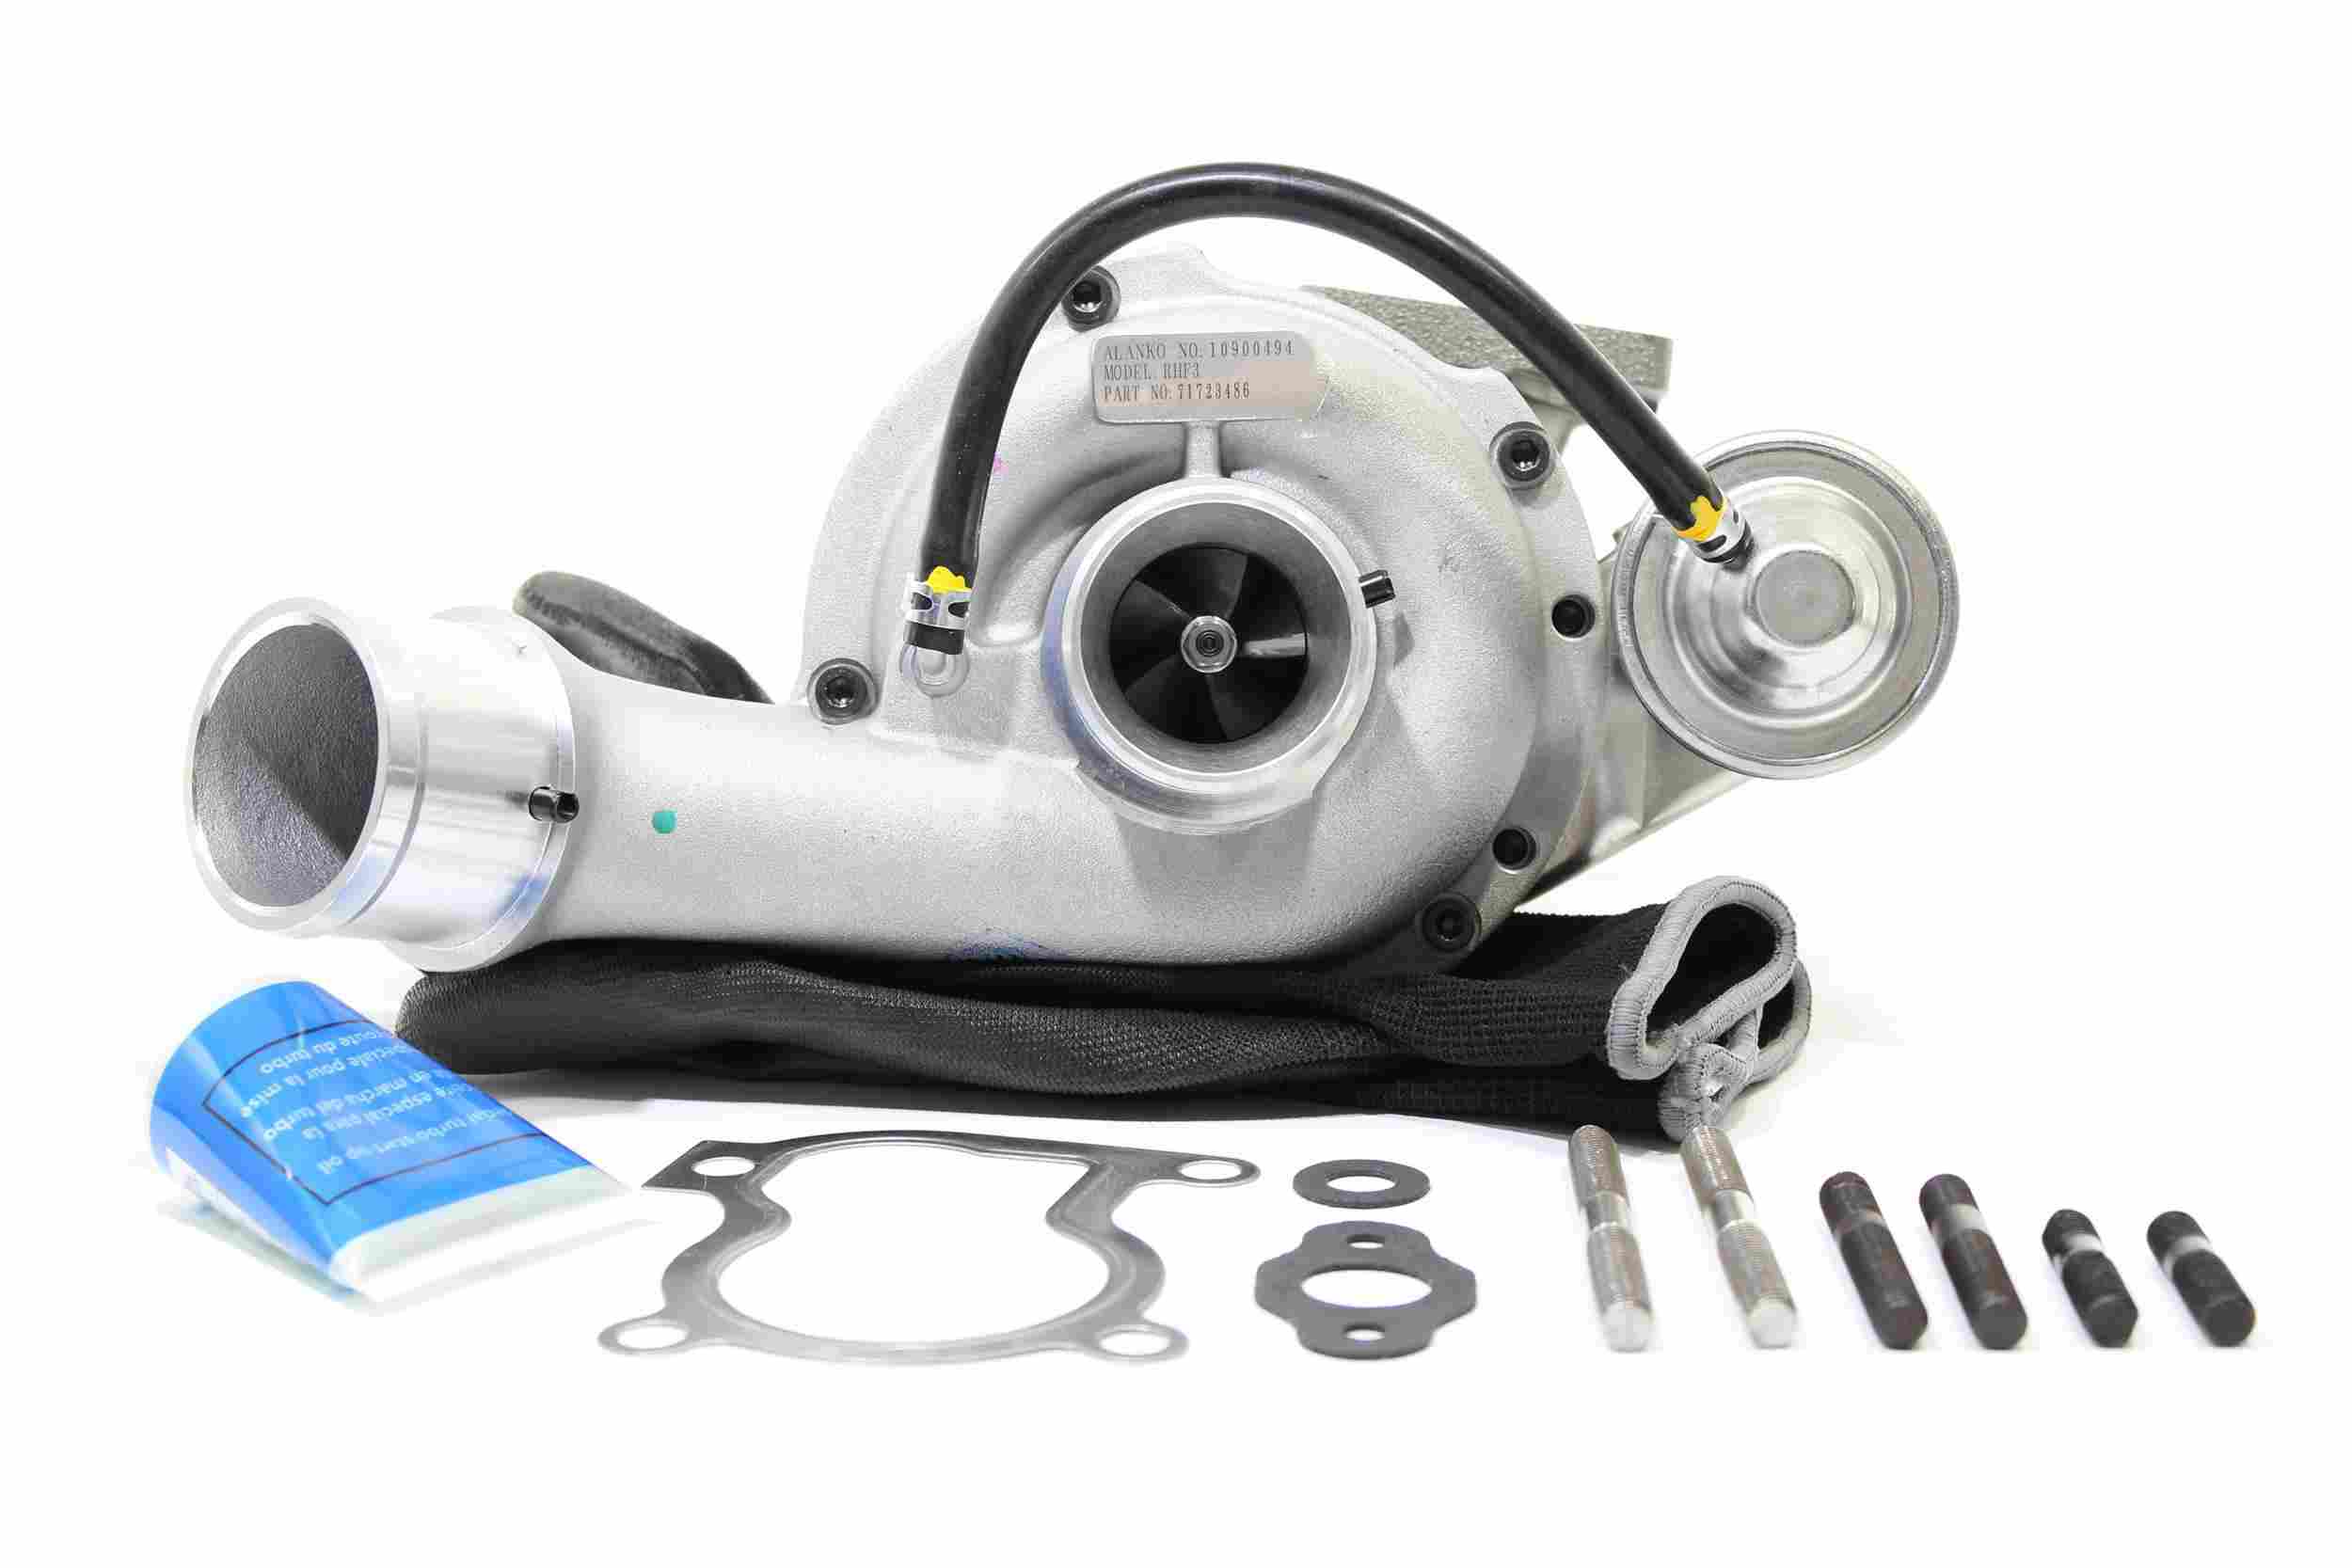 ALANKO 10900494 Turbocharger Exhaust Turbocharger, Incl. Gasket Set, with attachment material